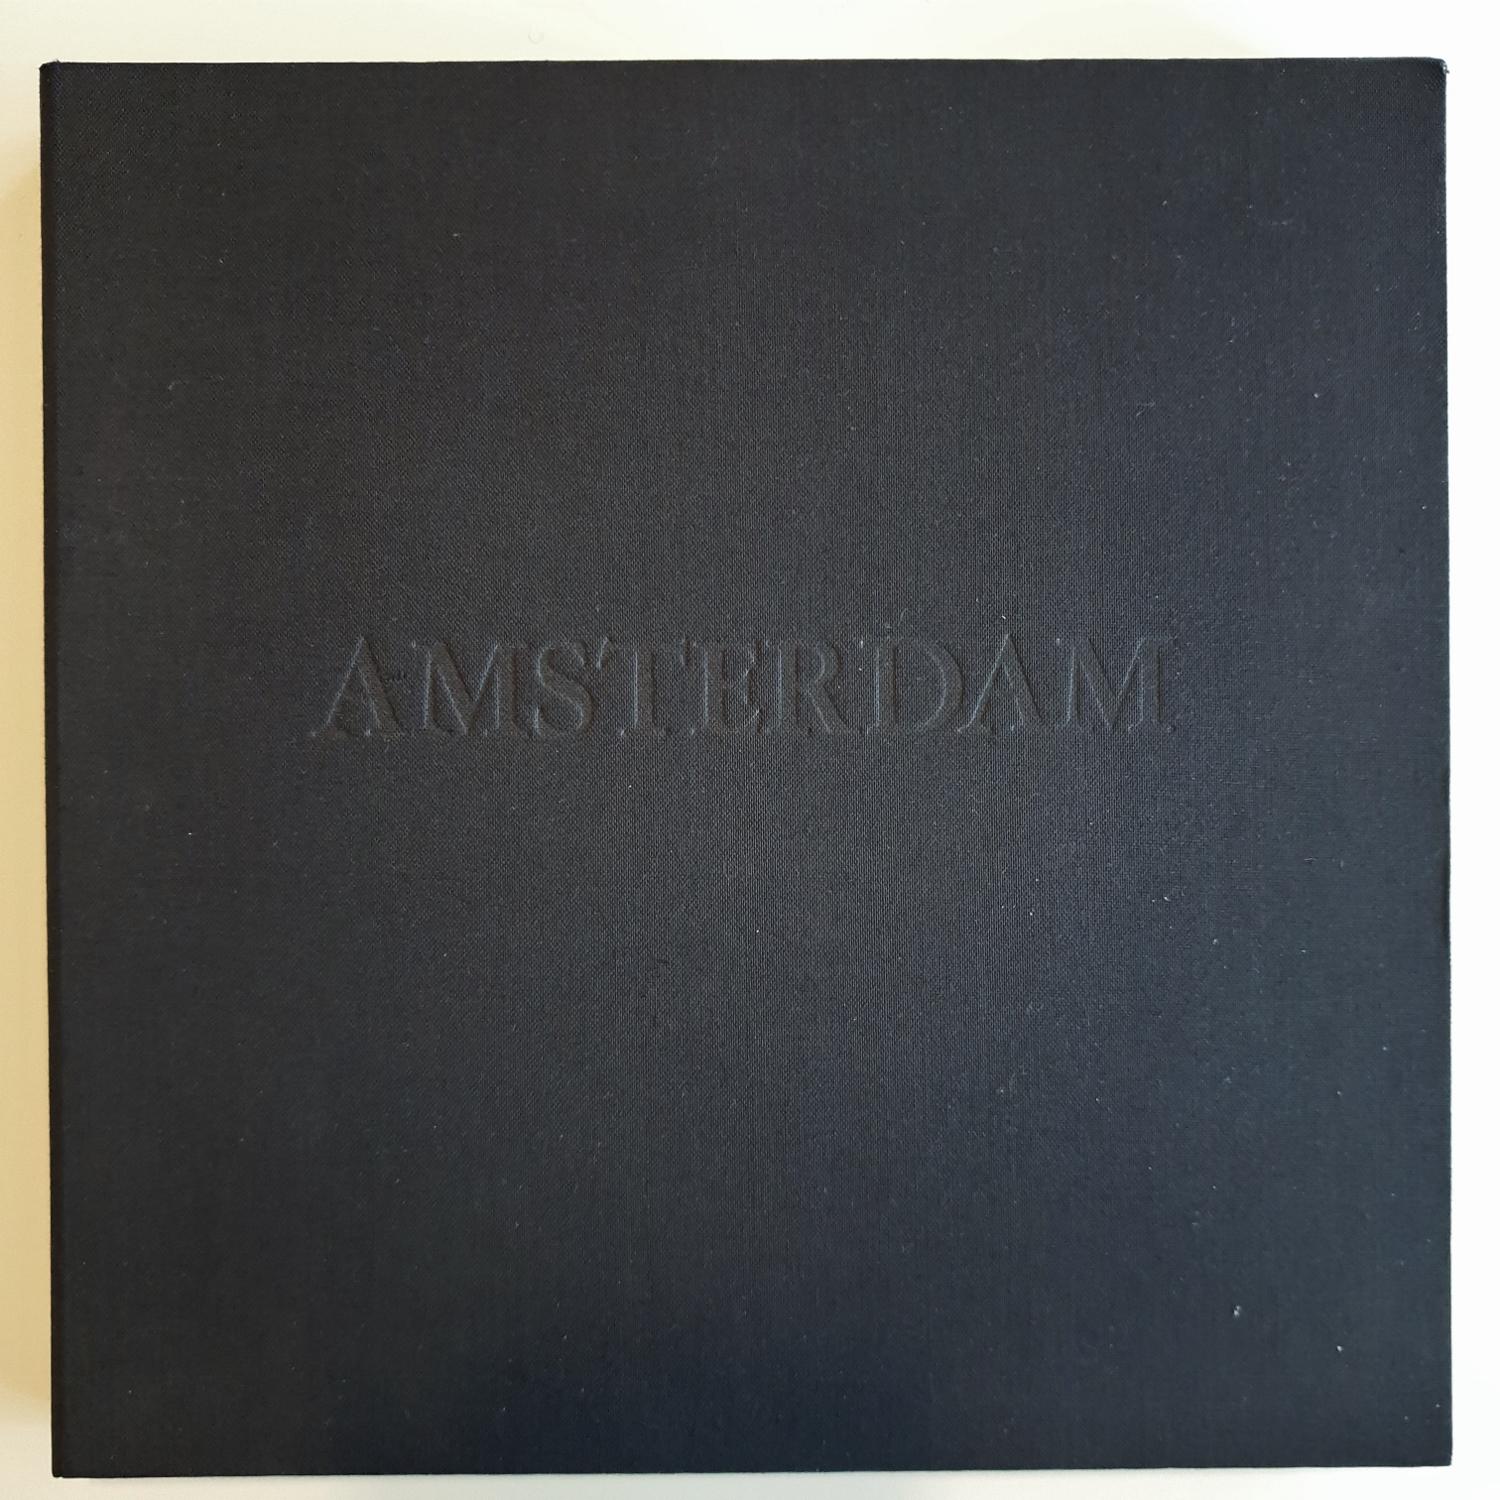 Amsterdam VI is an intriguing early career aquatint dry-needle etch print by renowned French-Dutch artist Olivier Julia. It depicts a detail of an old Amsterdam house facade is both abstract and realistic at the same time. The paper used is 240